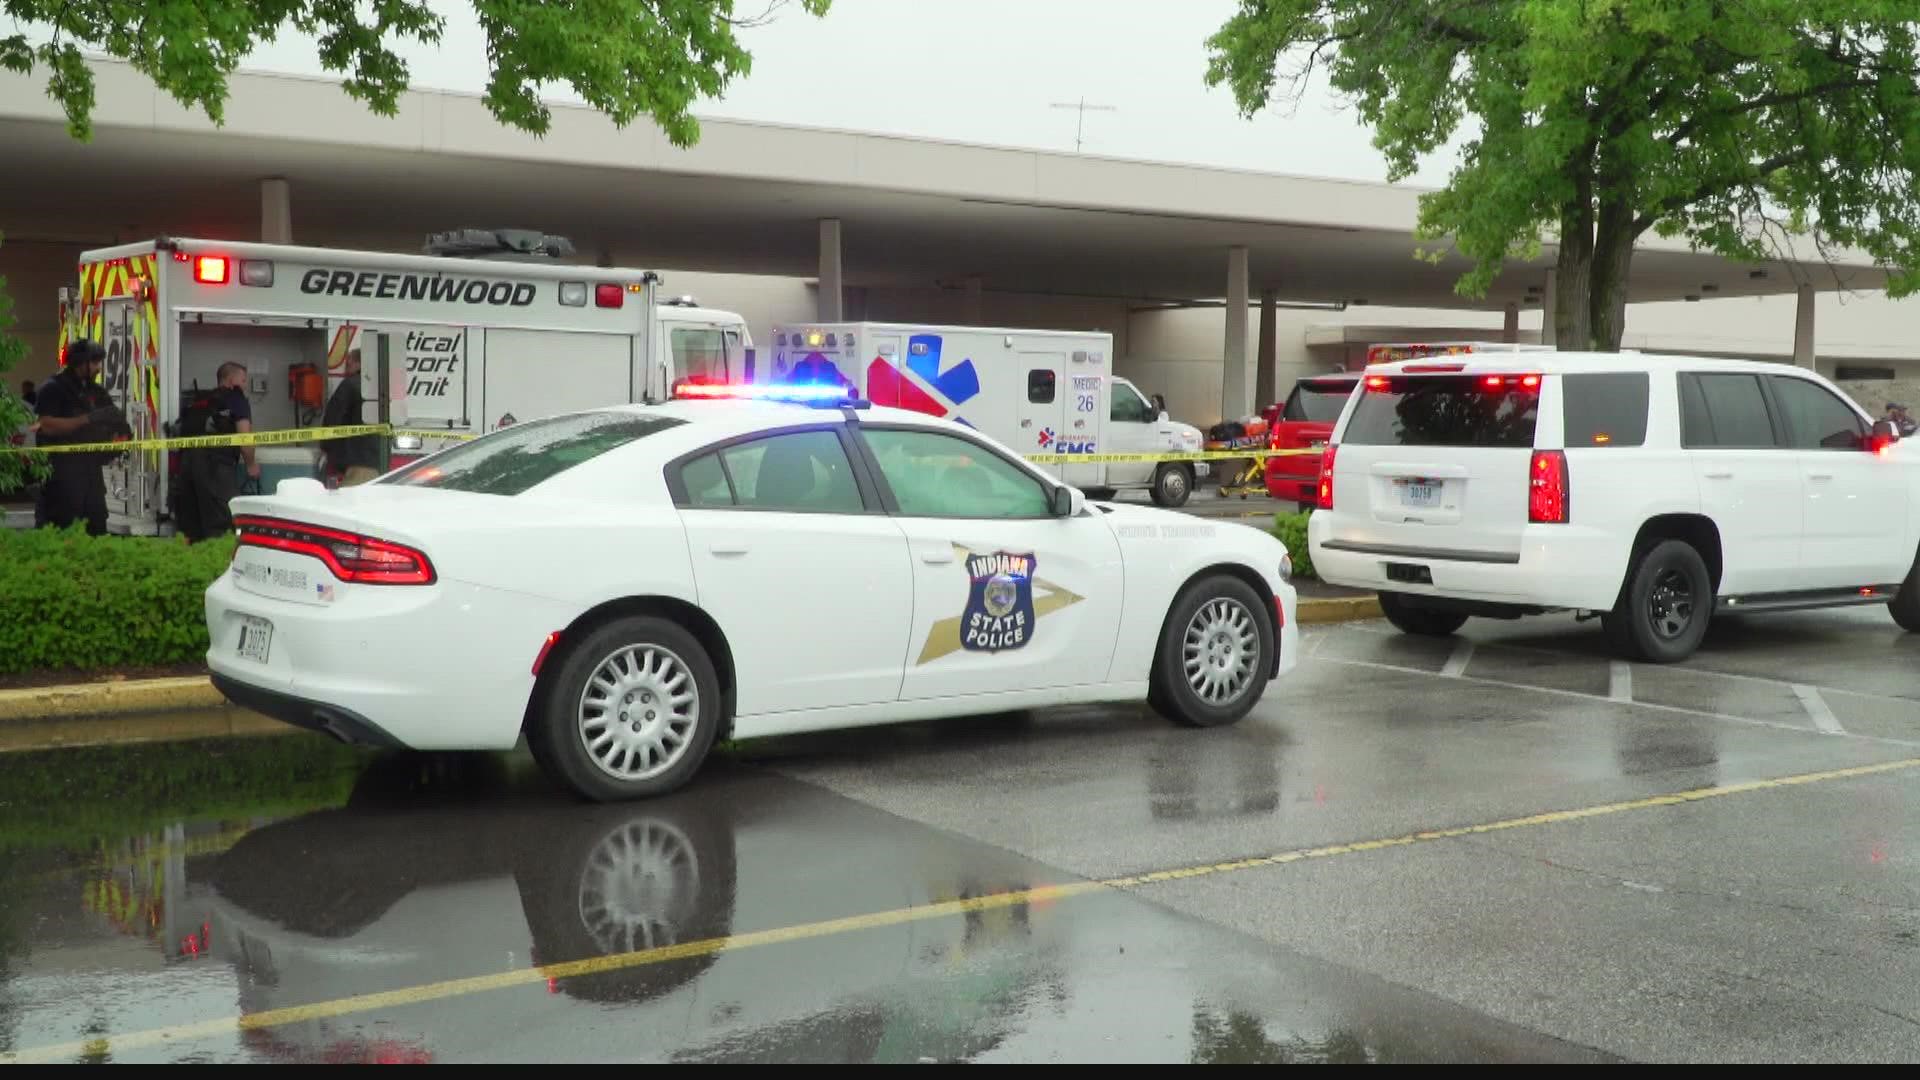 The latest updates on the Greenwood Park Mall shooting investigation for Wednesday morning.